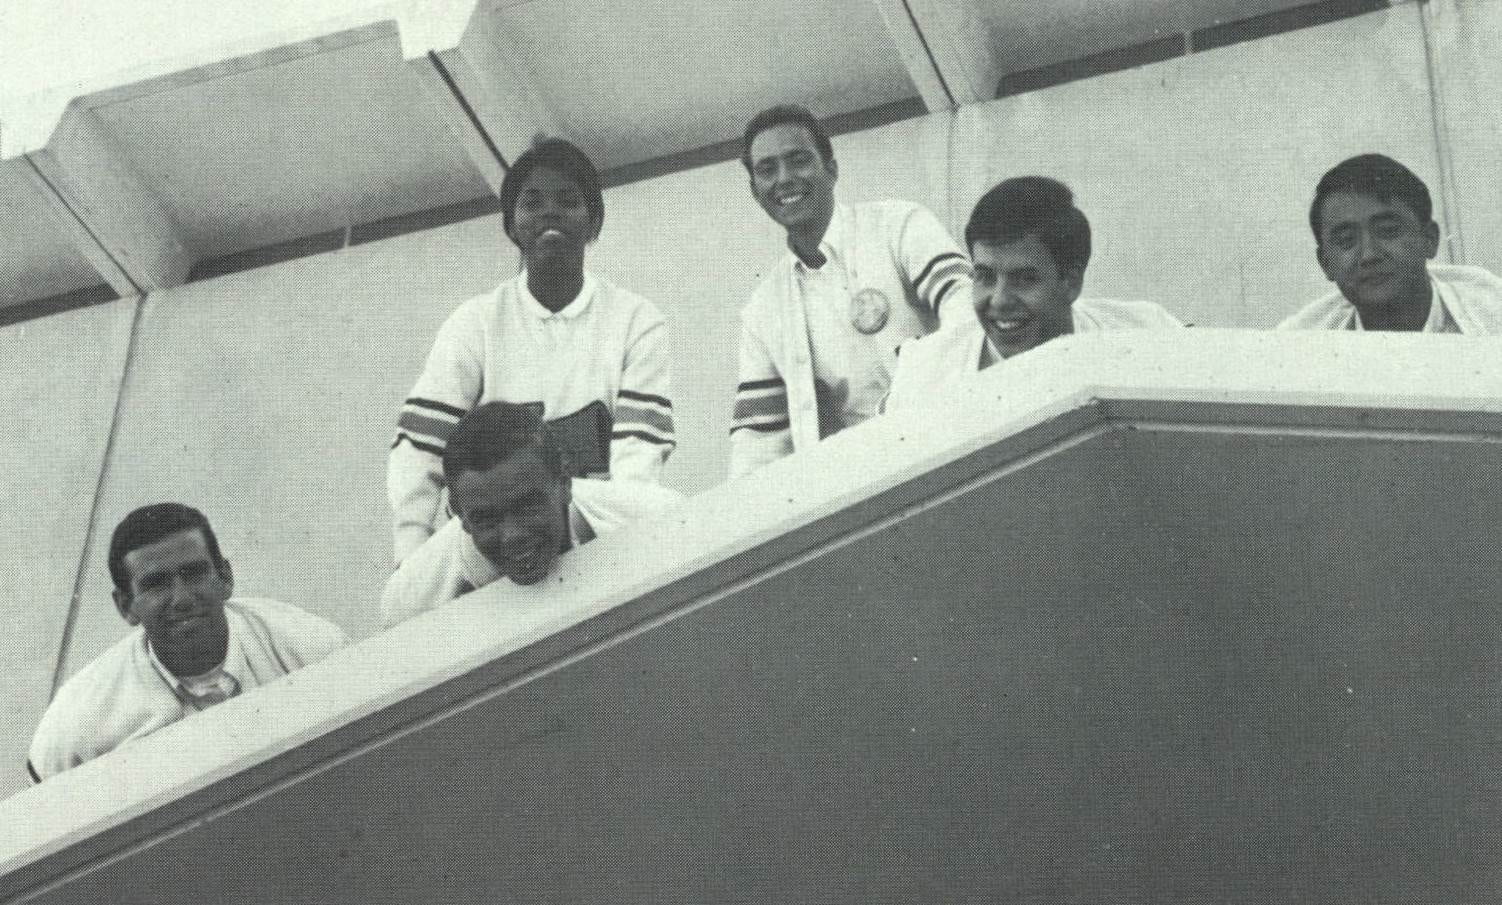 Priscilla Scotlan '68 (top row) was the first female Yell Leader at USF.  Pictured here are other Yell Leaders Pat Marantette, Tim King, Ed Chiosso, Frank Clifford, and Al Rodrigues. From the Don, 1968. From Gleeson Library's Digital Collections.   